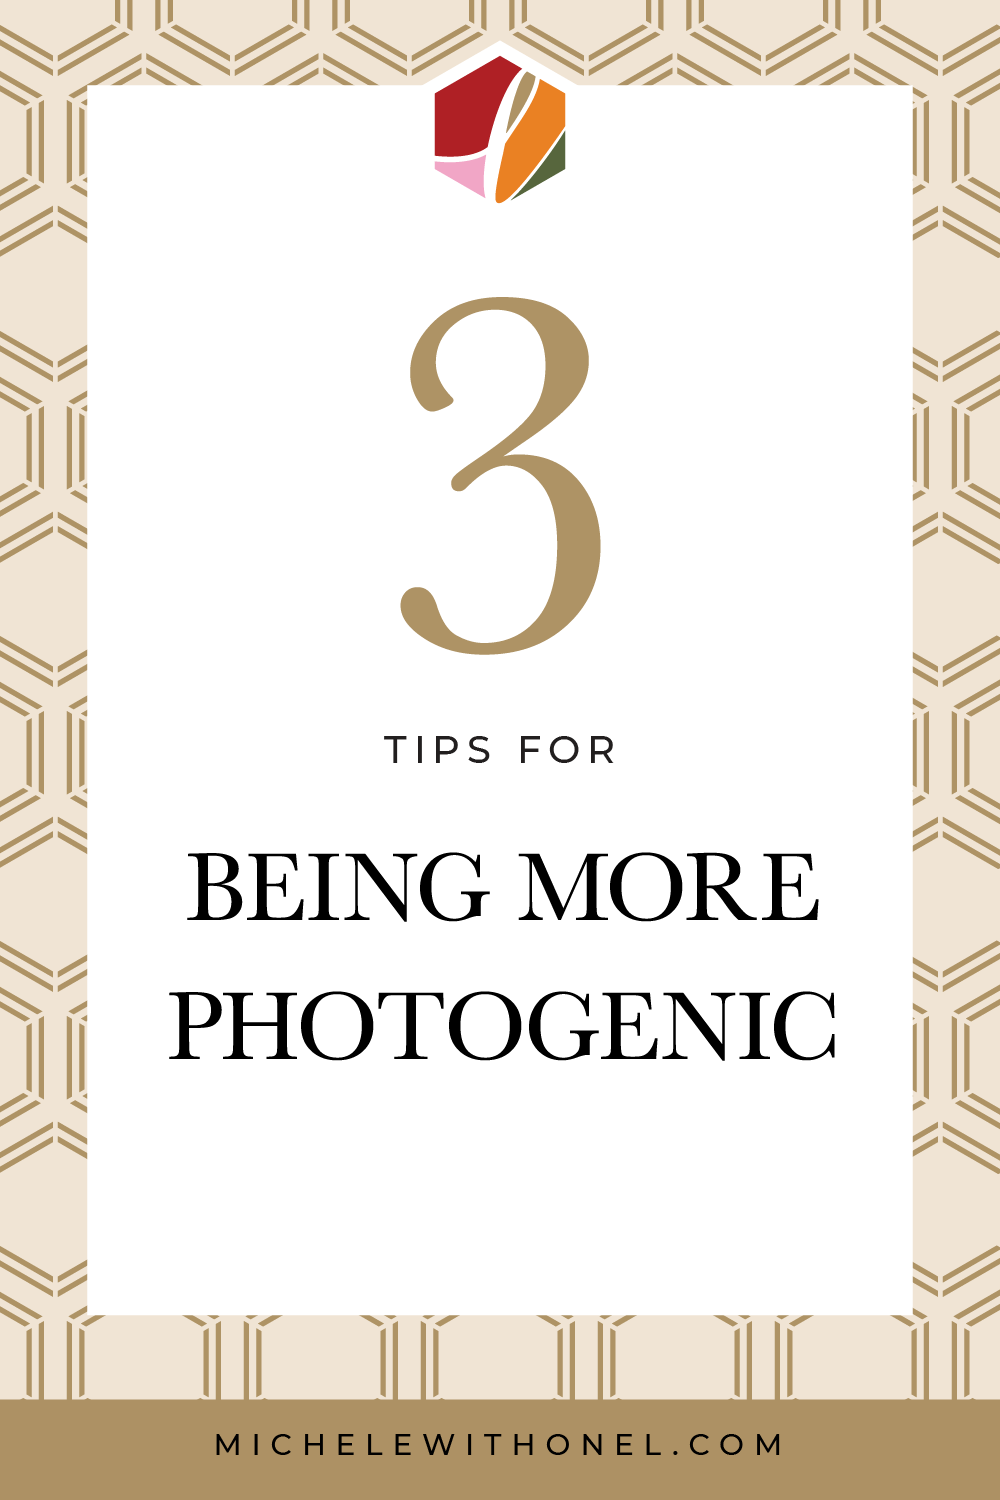 “I’m just not that photogenic!!” If that sounds like something you would say, these 3 photo shoot tips are for you! The real reason you’re not photogenic has nothing to do with you and everything to do with the photographer. Head over to the blog post to find out how to find a photographer who flatters, and how to get comfortable in front of the camera. #photographytips #photoshoot #photography #marketing